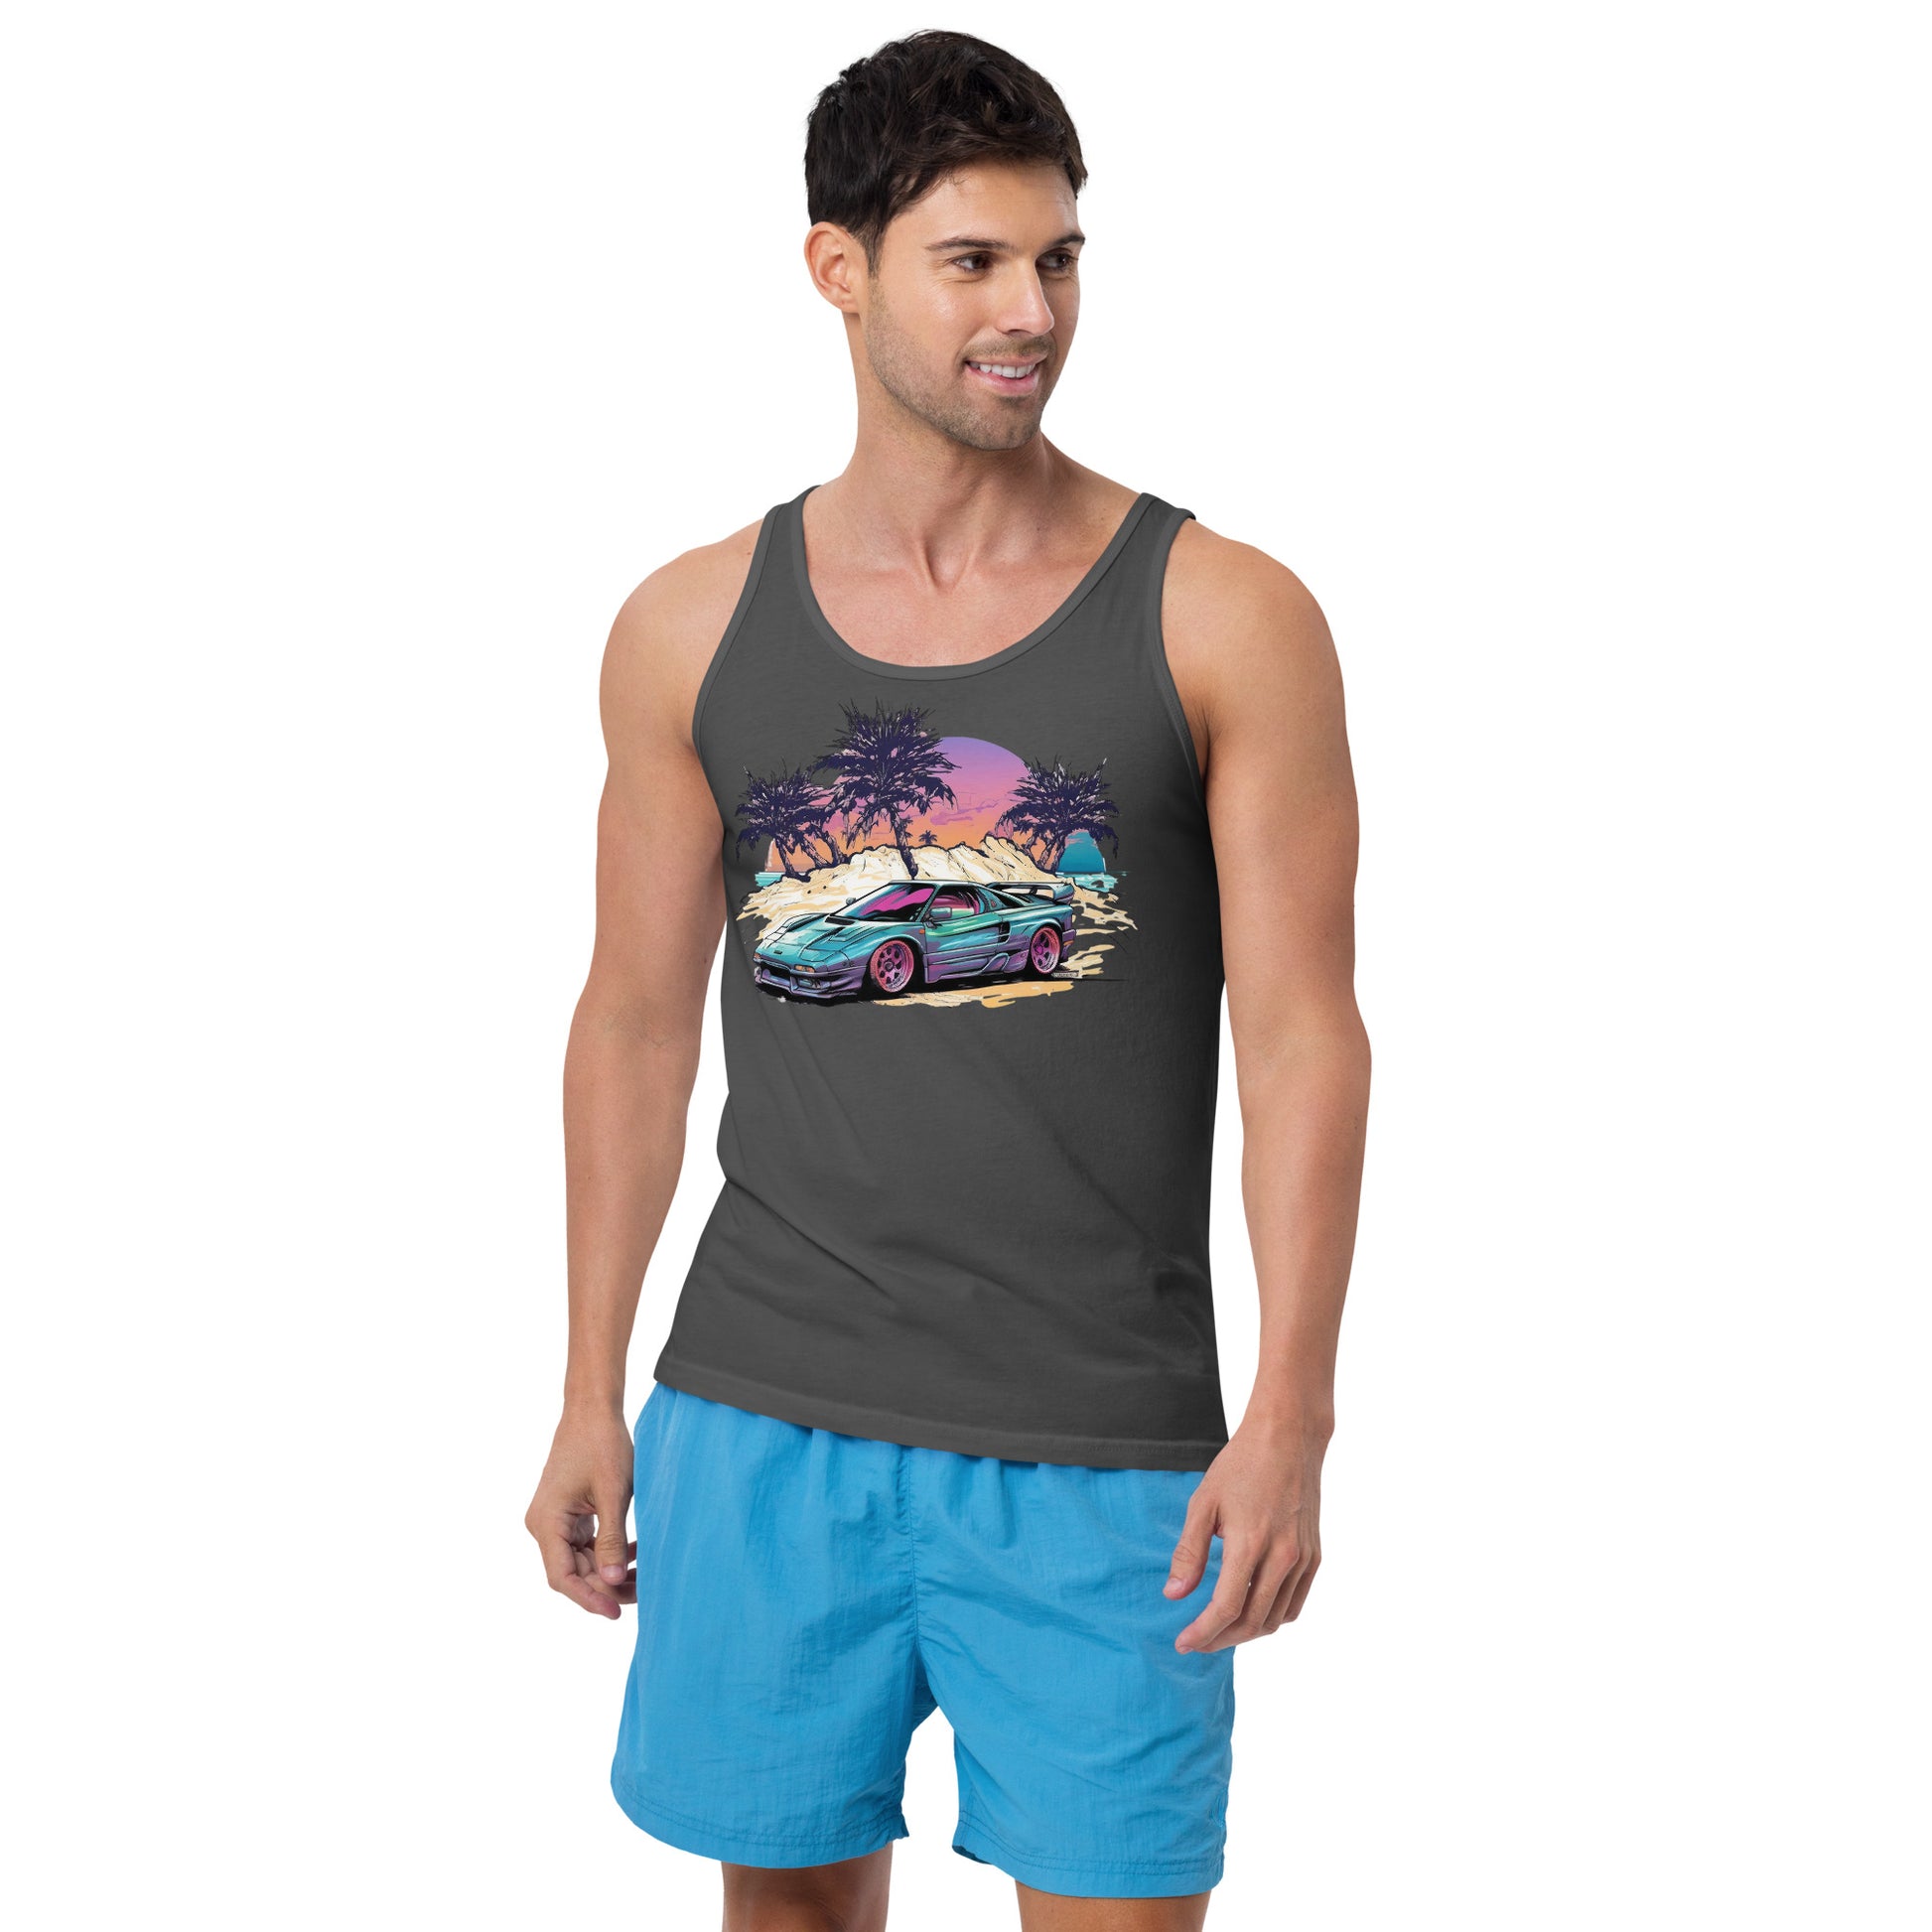 man with grey tank top with picture of vintage car in front of palm trees 